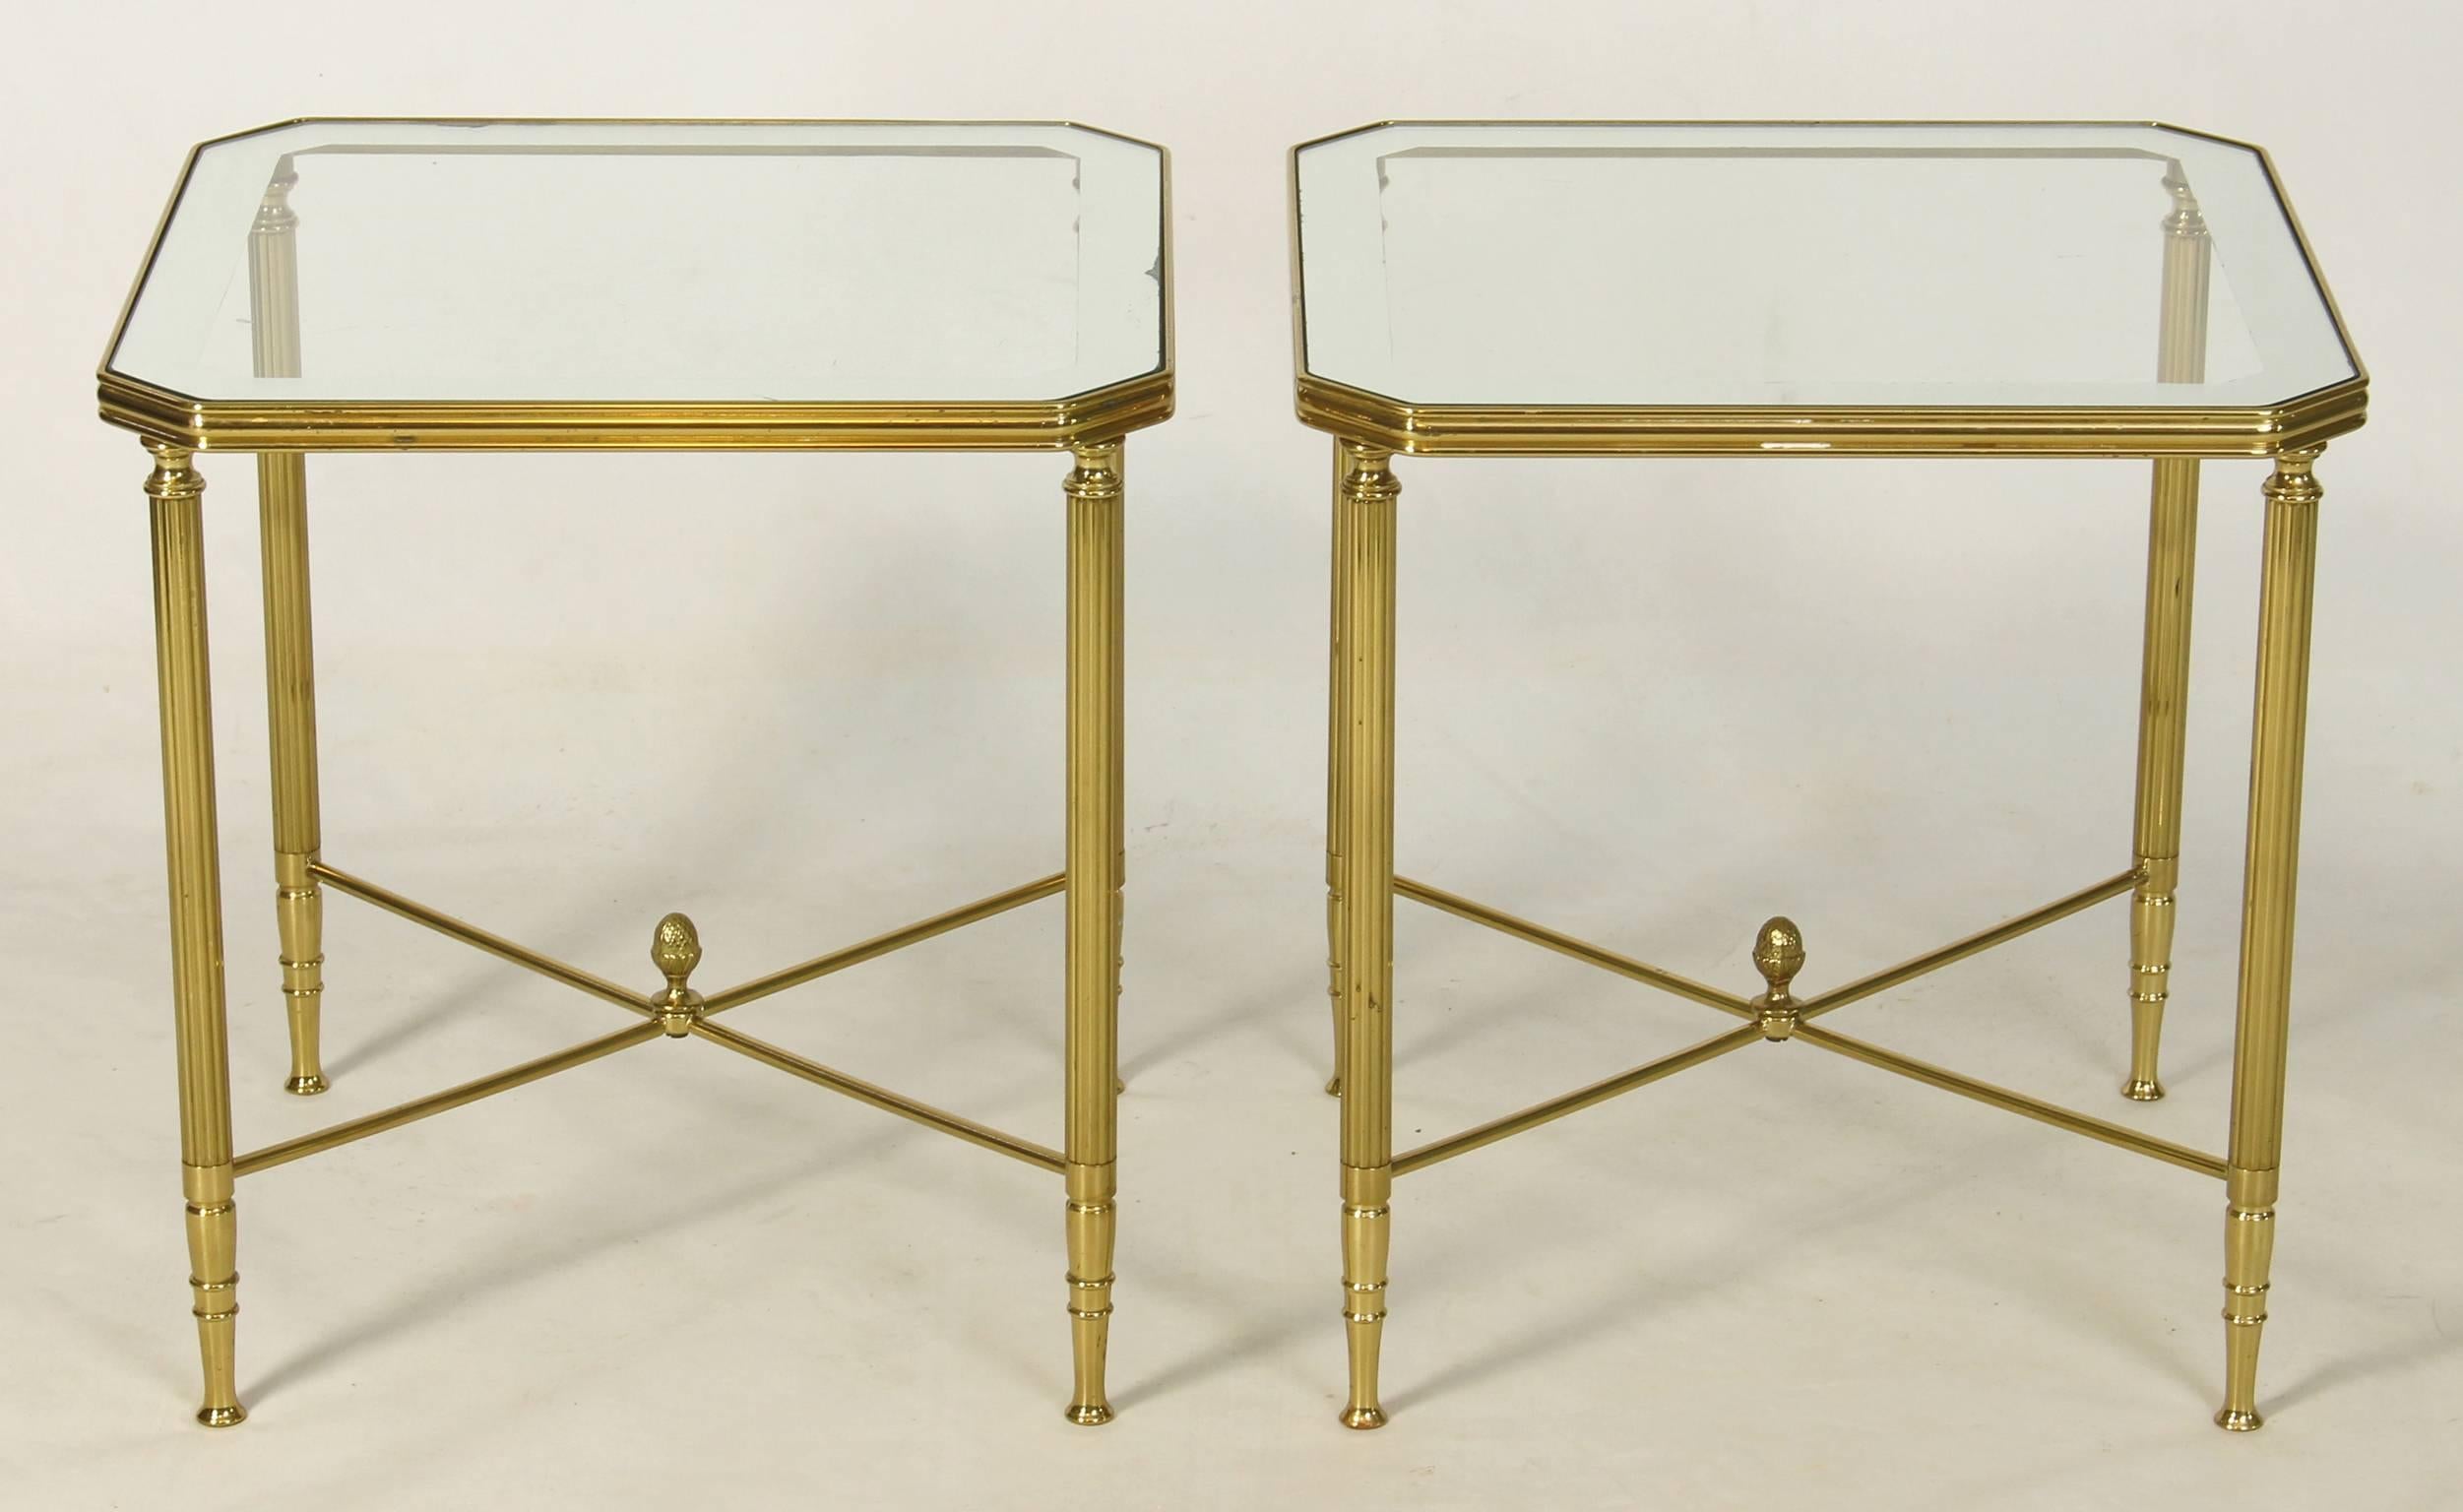 An elegant pair of mid-20th century. French solid brass side tables inset with clear glass and mirror bodered tops.